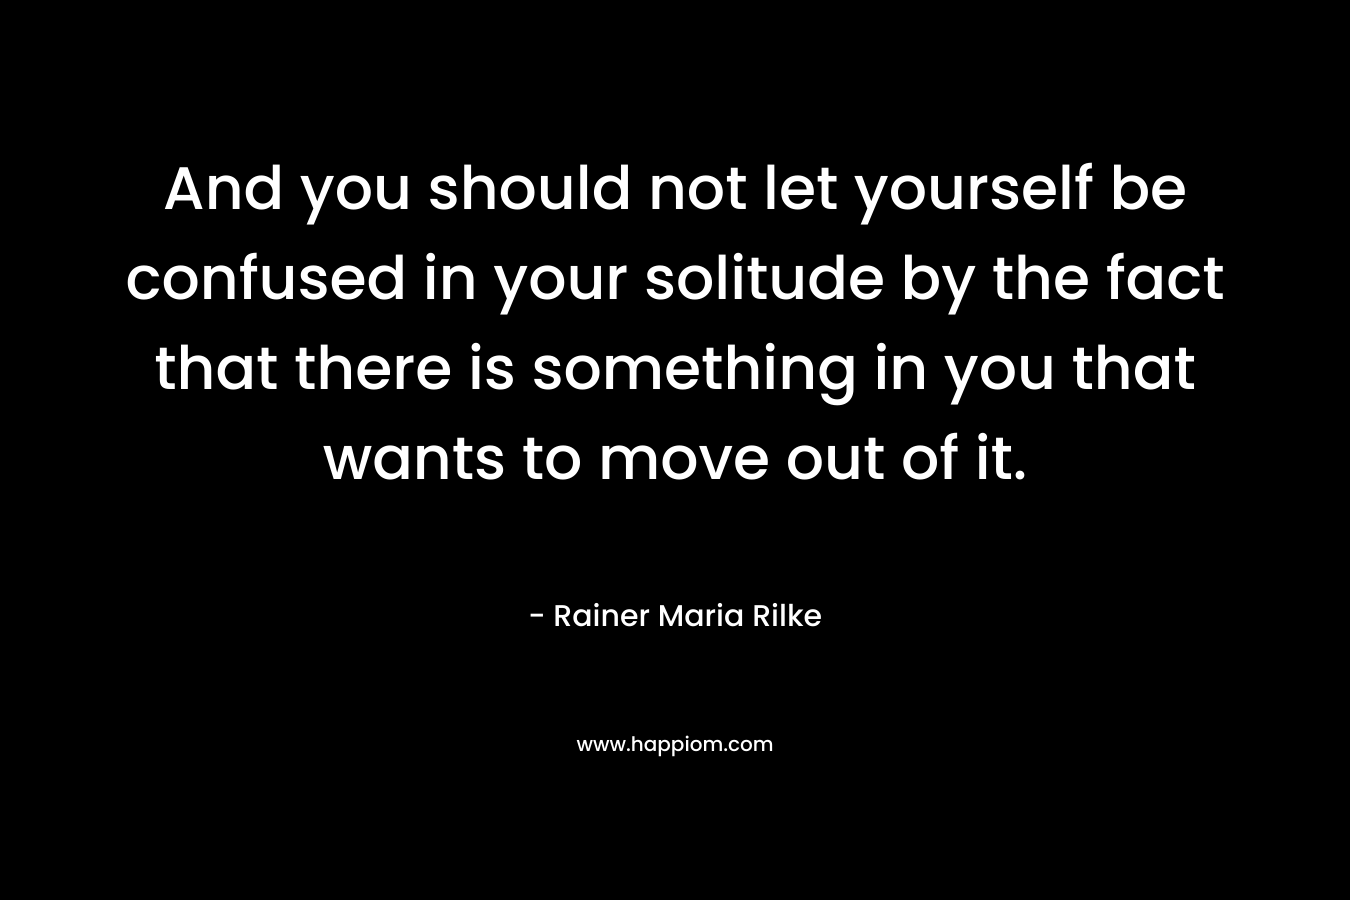 And you should not let yourself be confused in your solitude by the fact that there is something in you that wants to move out of it.